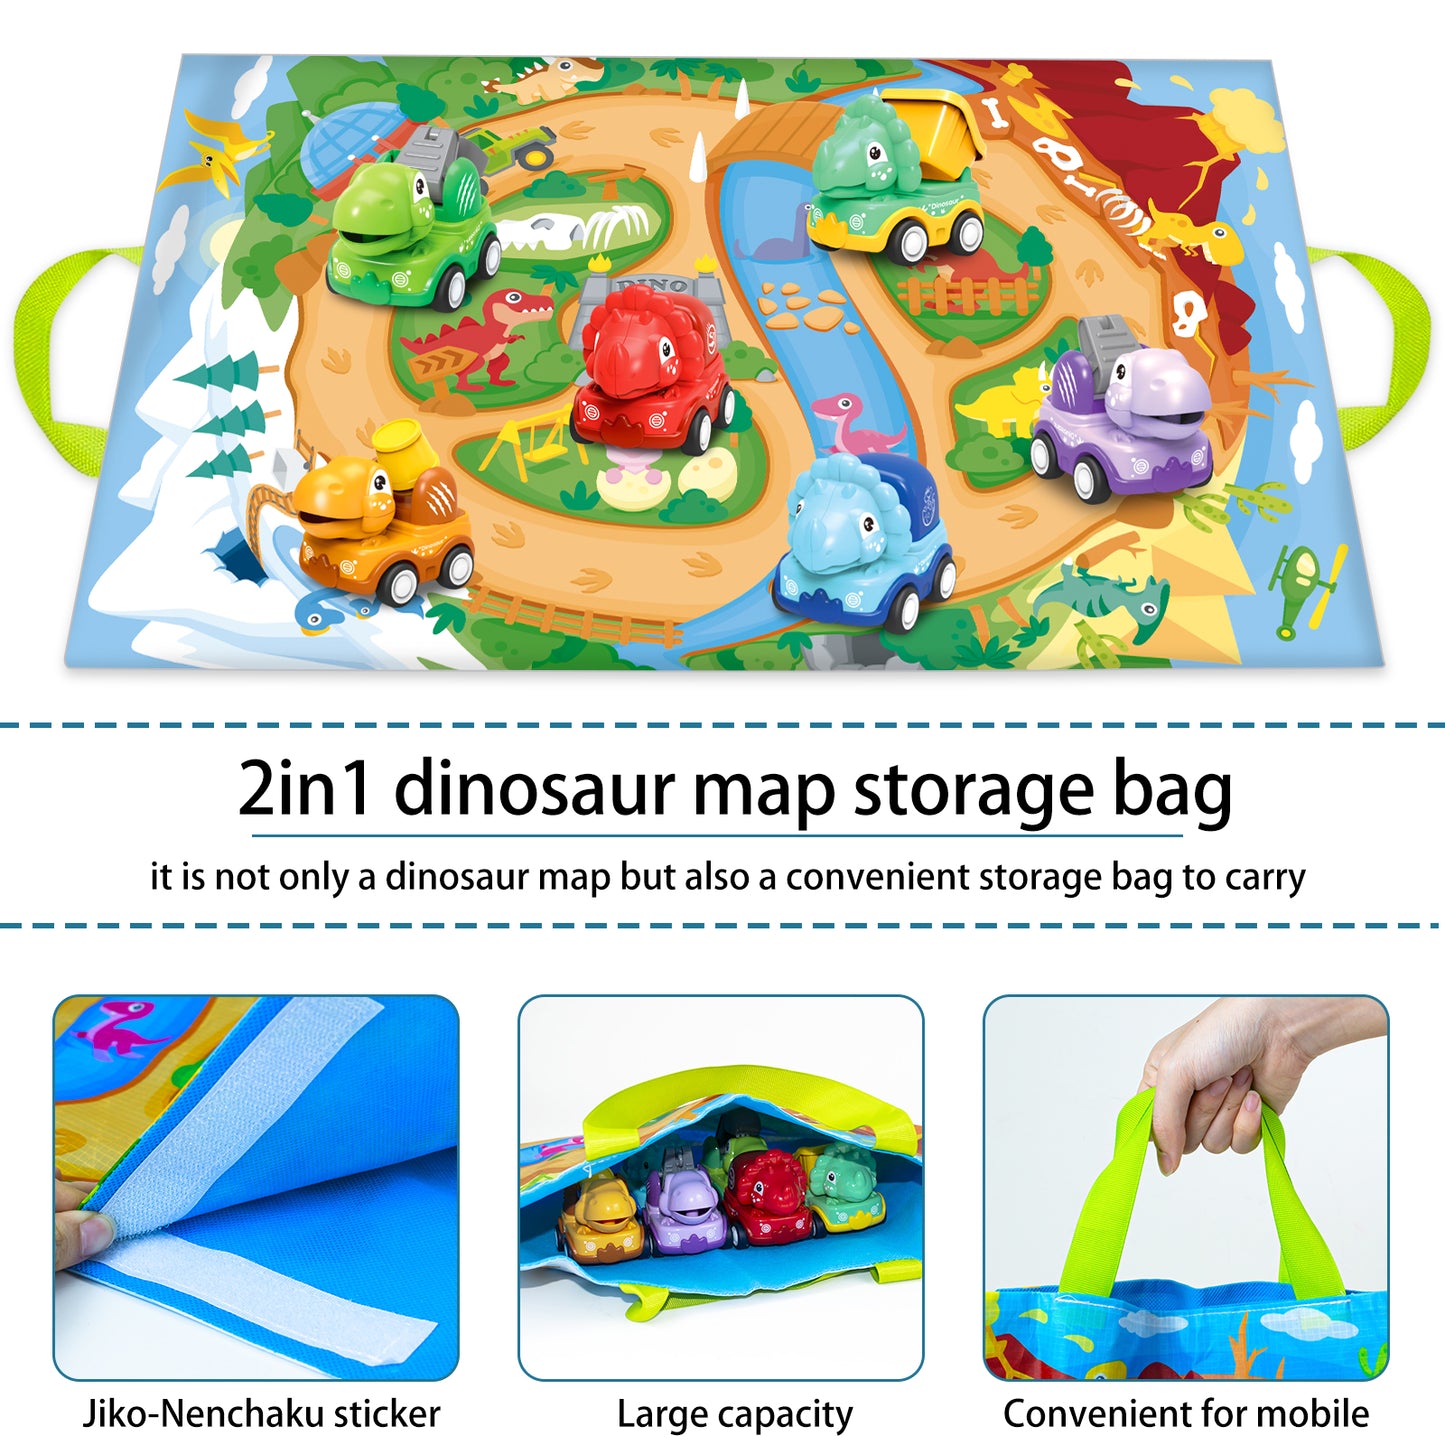 Baby Truck Car Toys with Playmat/Storage Bag, Baby Toys 12-18 Months|Toys for 1 2 3 Year Girl Boy| Baby Construction Vehicles 1st Birthday Gift Educational Toys for Infants Toddlers